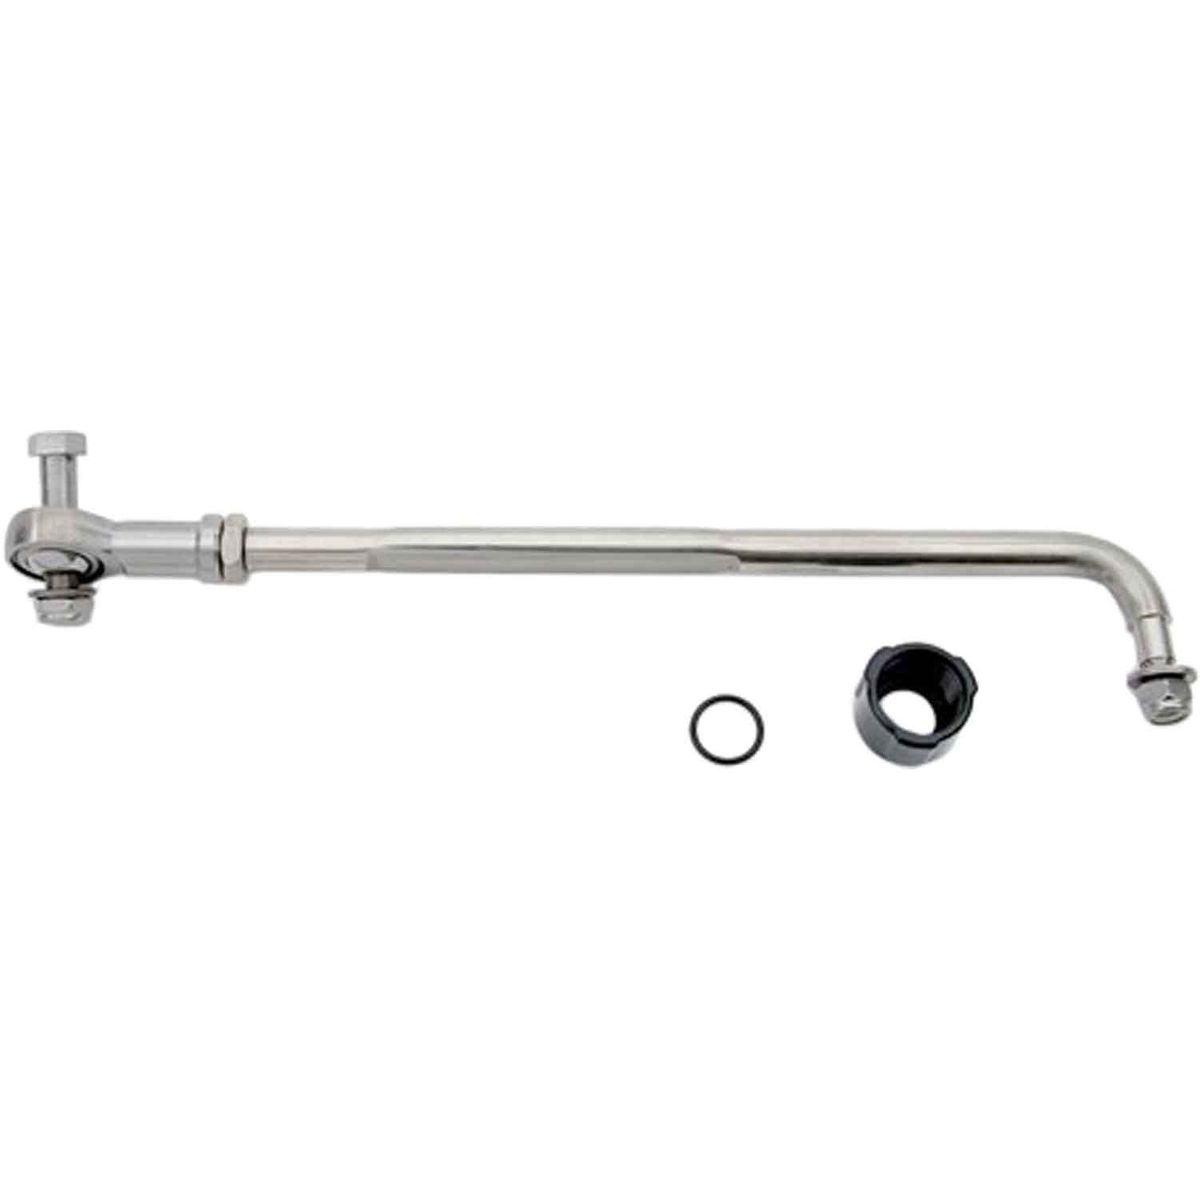 A73 Stainless Steel Link Arm Kit (Mercury Outboards)